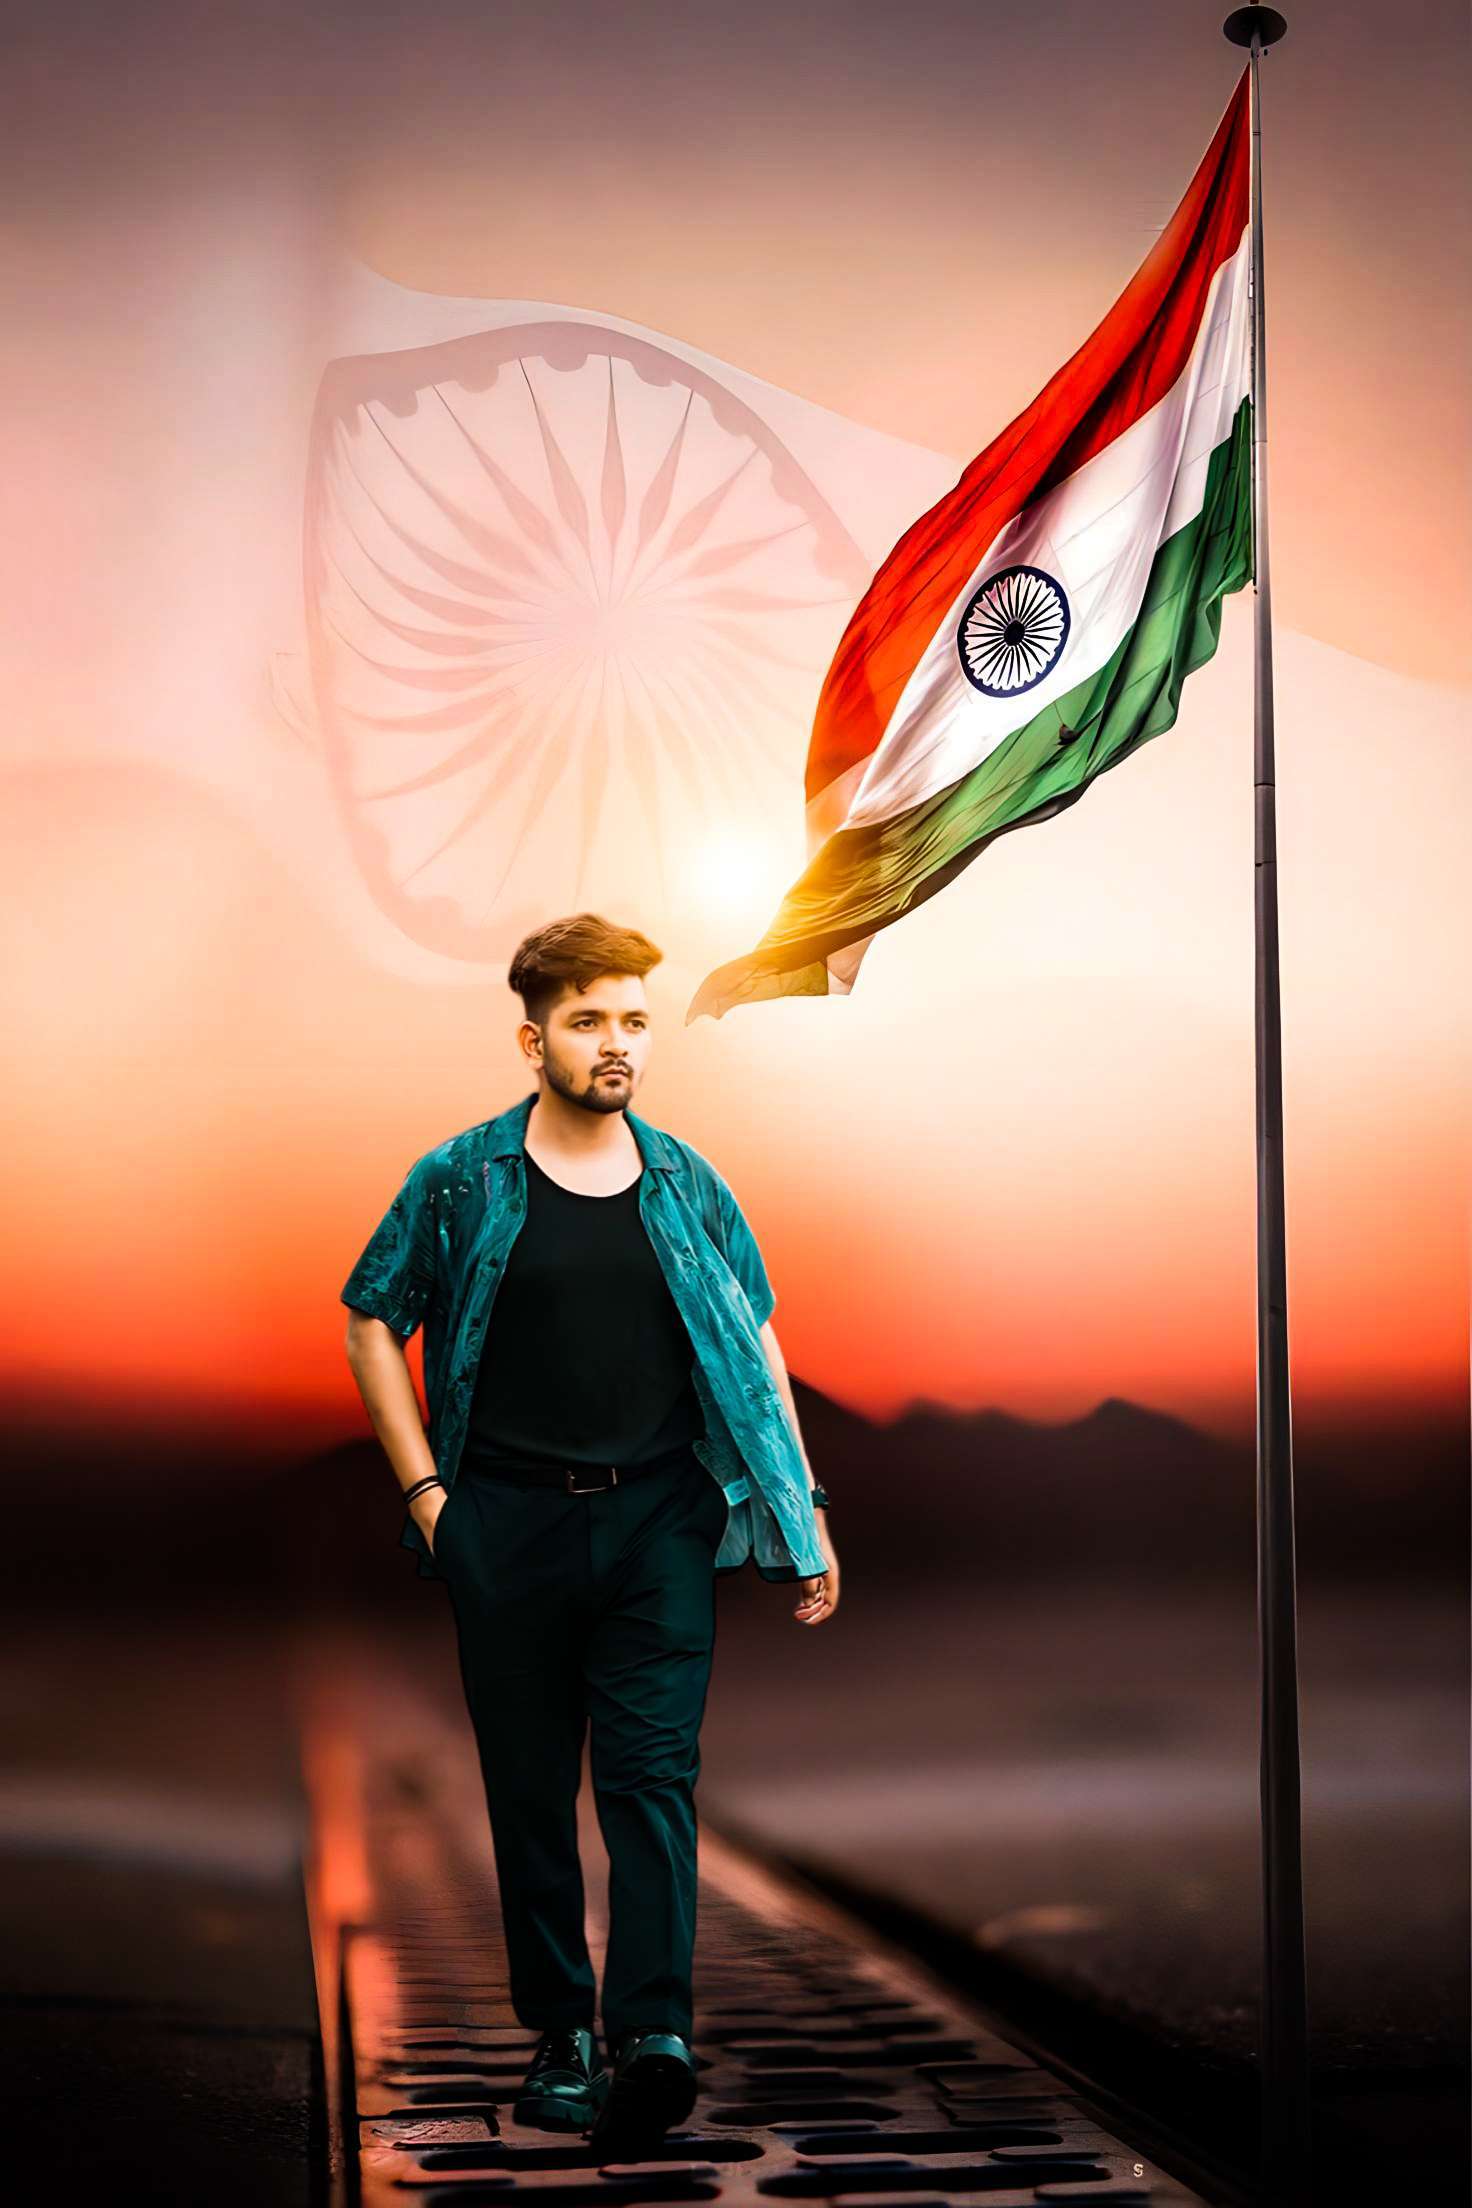 15 August Photo Editing and Indian Flag 15 August image With my Photo and You Can Download 15 August background HD free and then You Can Use This Background In PicsArt. Hello Guy's if you want to 15 August editing background Today I'm giving in this website independence day background for Photo editing so visit my Website and download PicsArt Editing background You can Download all Types Of background for free from this website.you can Download PicsArt 15 August Photo Editing background HD from this website,if you have any problem in downloading 15 August Photo Editing background HD images and wallpaper you can Contact us or directly message